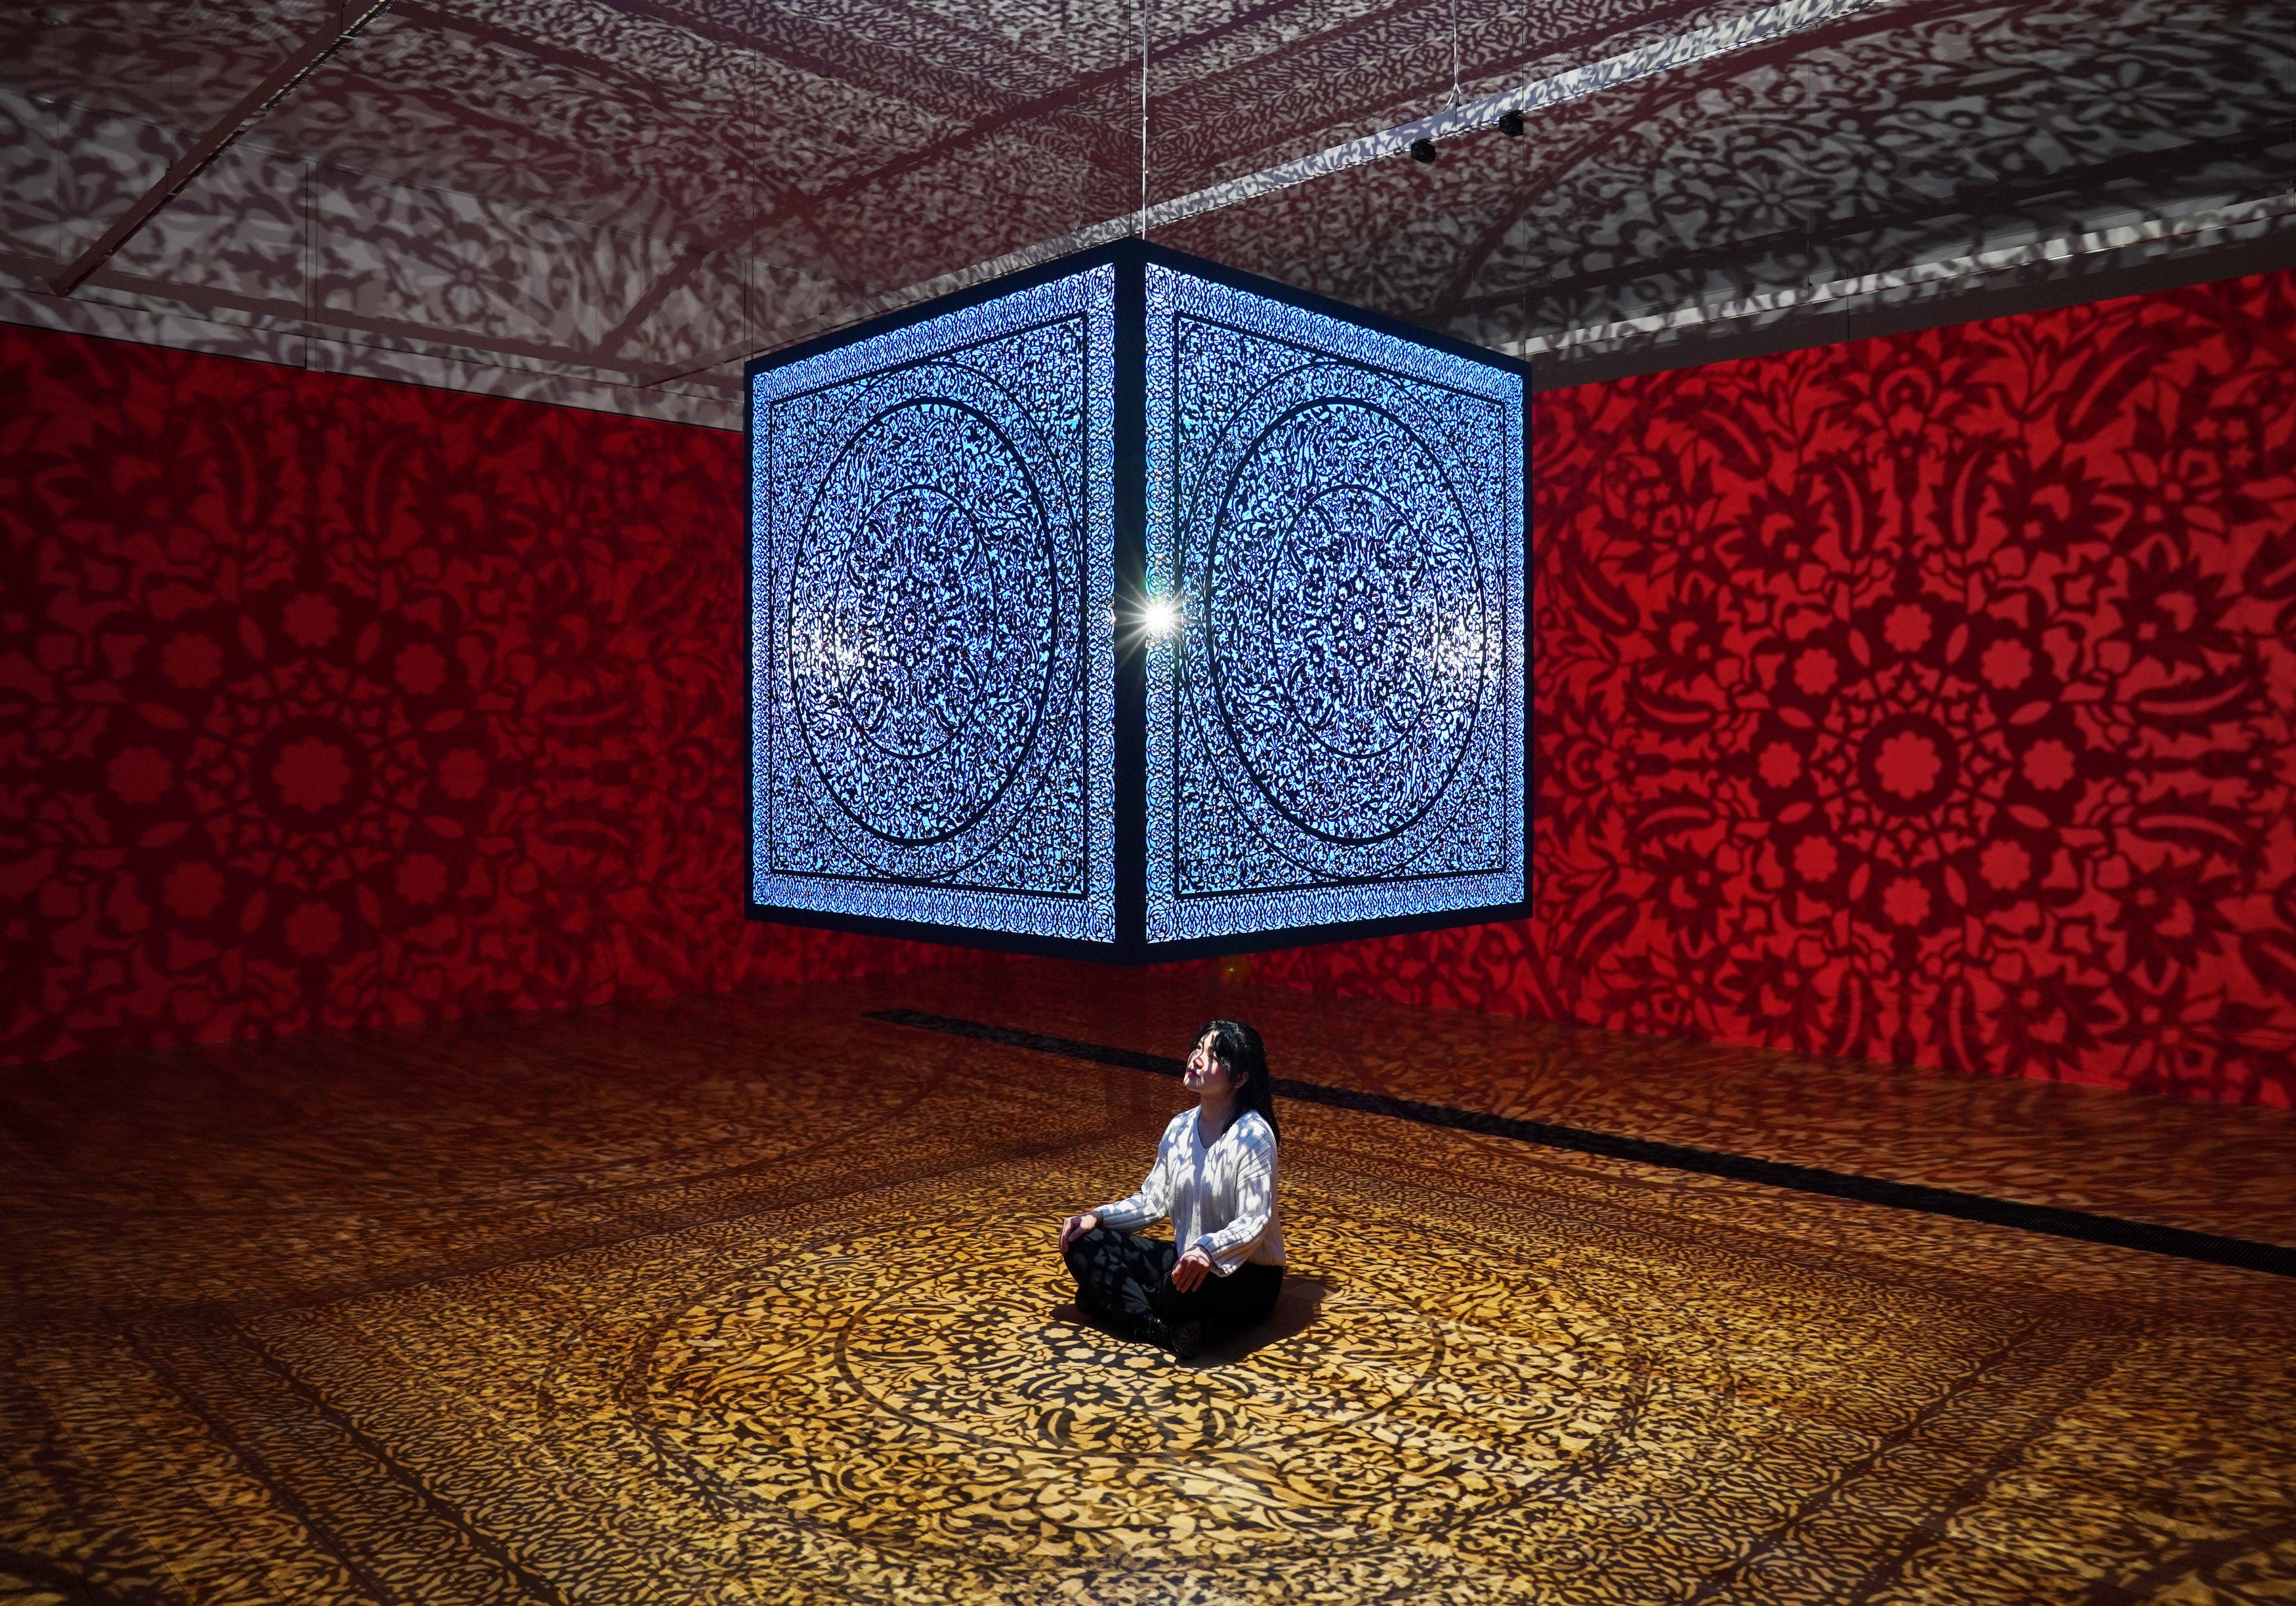 A visitor admires the title piece, a large suspended steel cube casting shadow patterns across the walls, by Anila Quayyum Agha at a preview for All The Flowers Are For Me show at Shirley Sherwood Gallery of Botanical Art in Kew Gardens.